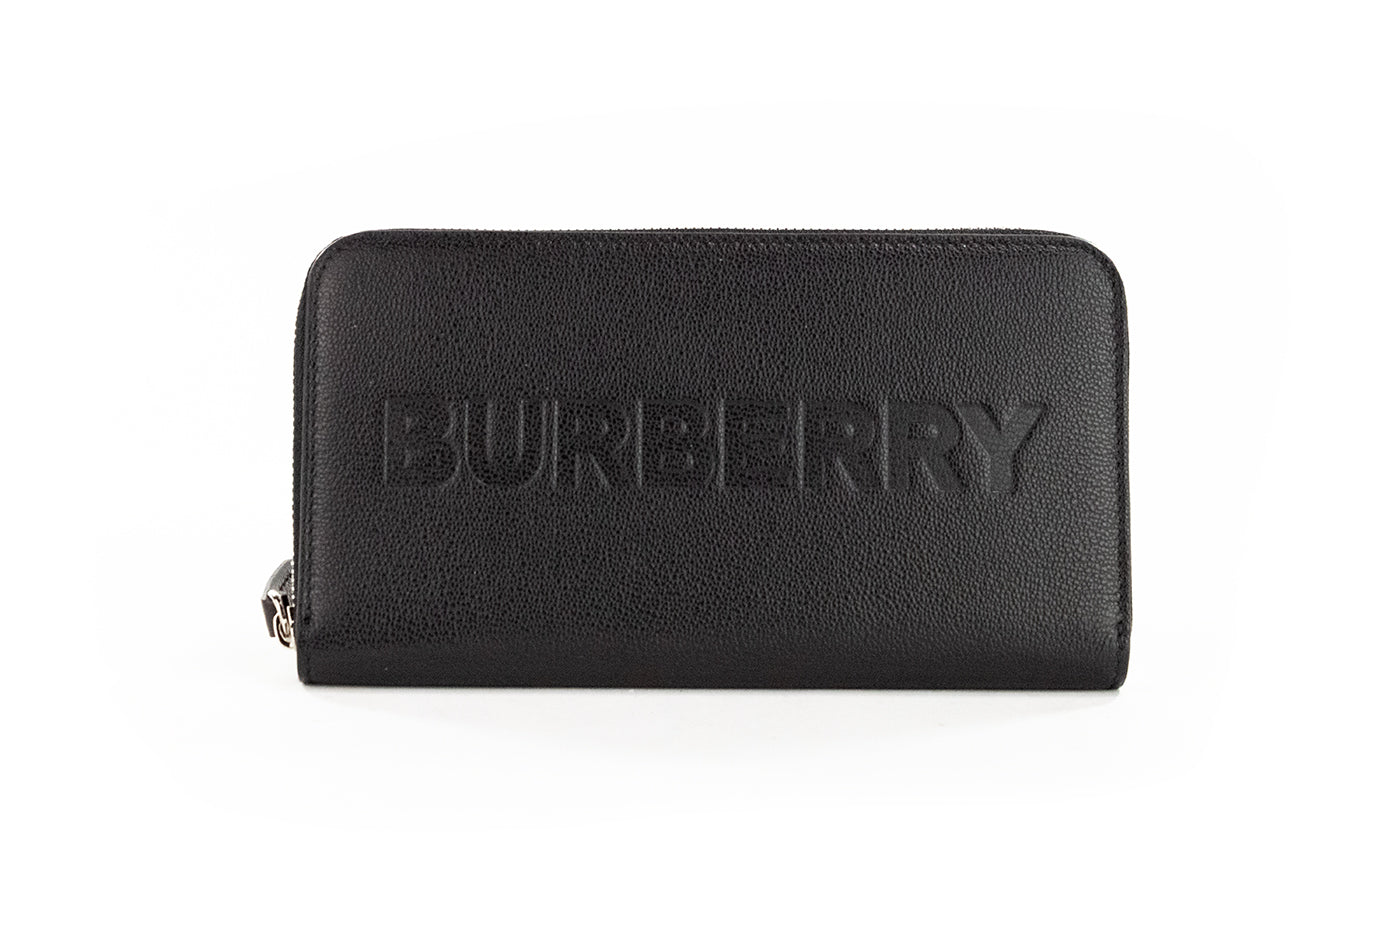 Burberry Elmore Black Embossed Logo Leather Continental Clutch Wallet